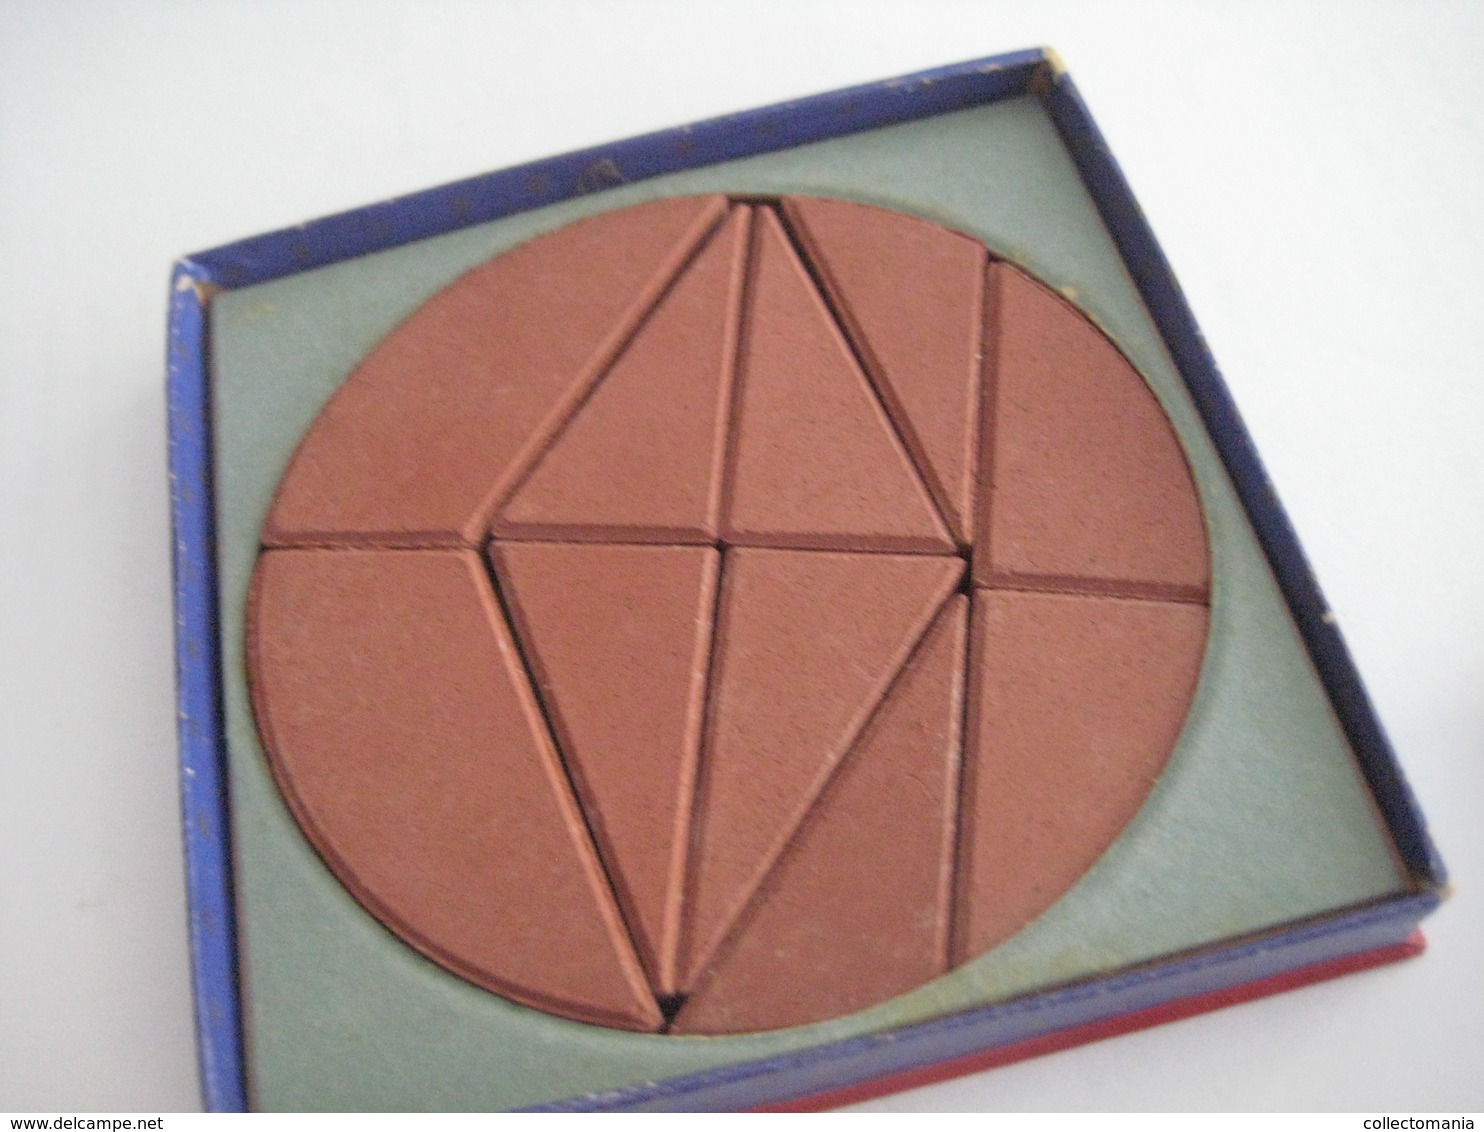 1 boite (doos, box) RARE c1900 litho problem of the circle, complete perfect, with booklet, mit buchlein 9cmX9cm RICHTER